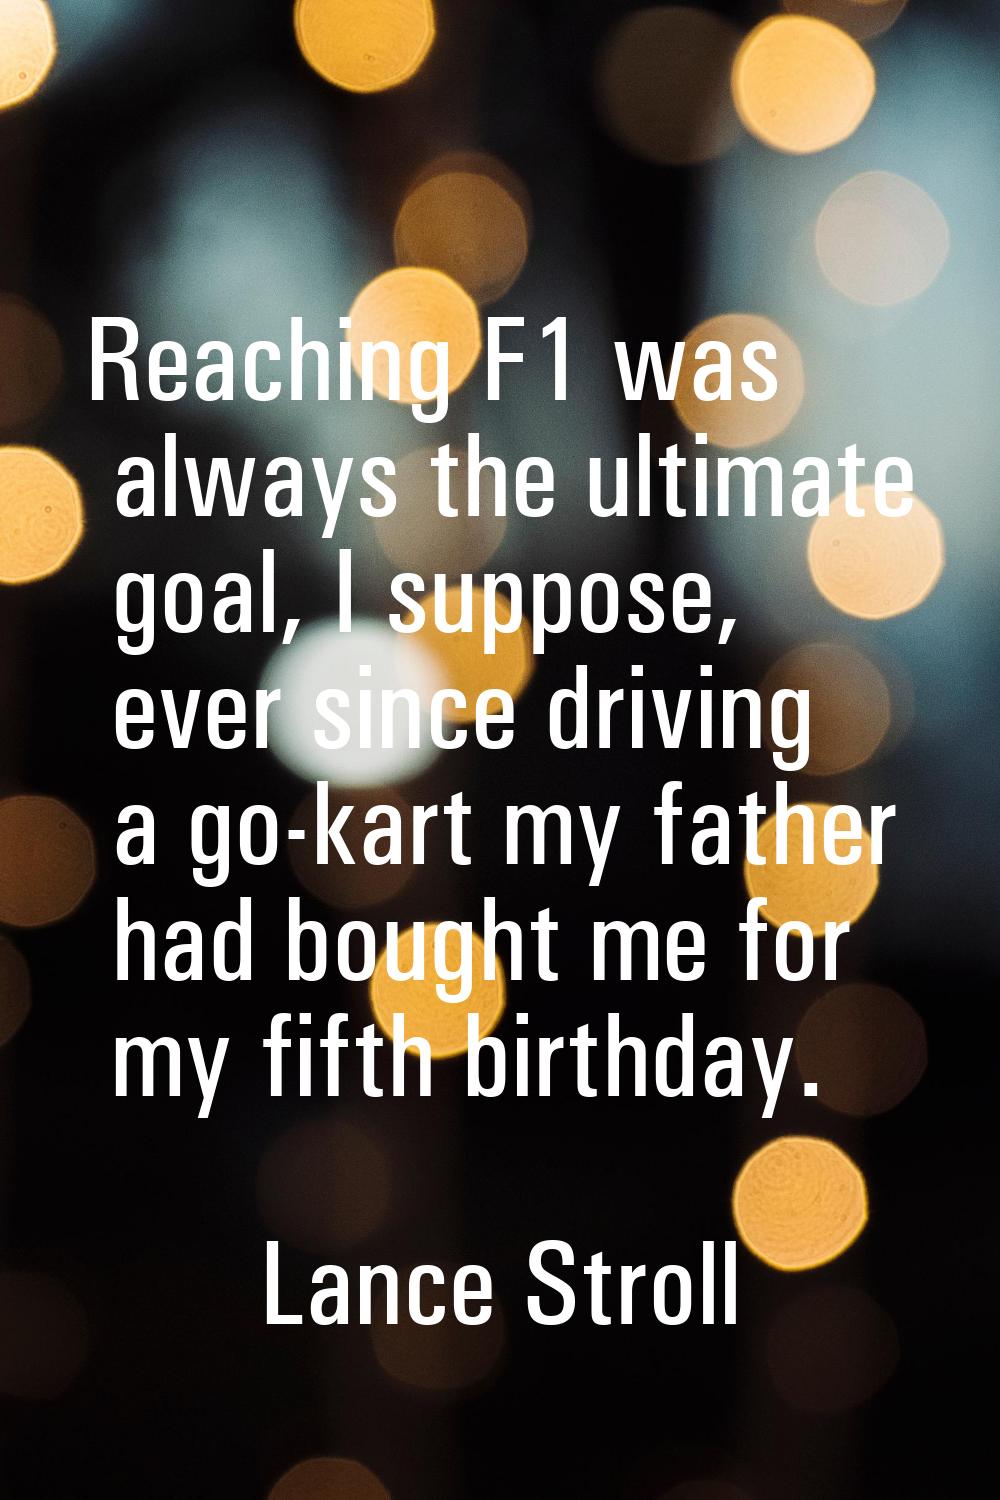 Reaching F1 was always the ultimate goal, I suppose, ever since driving a go-kart my father had bou